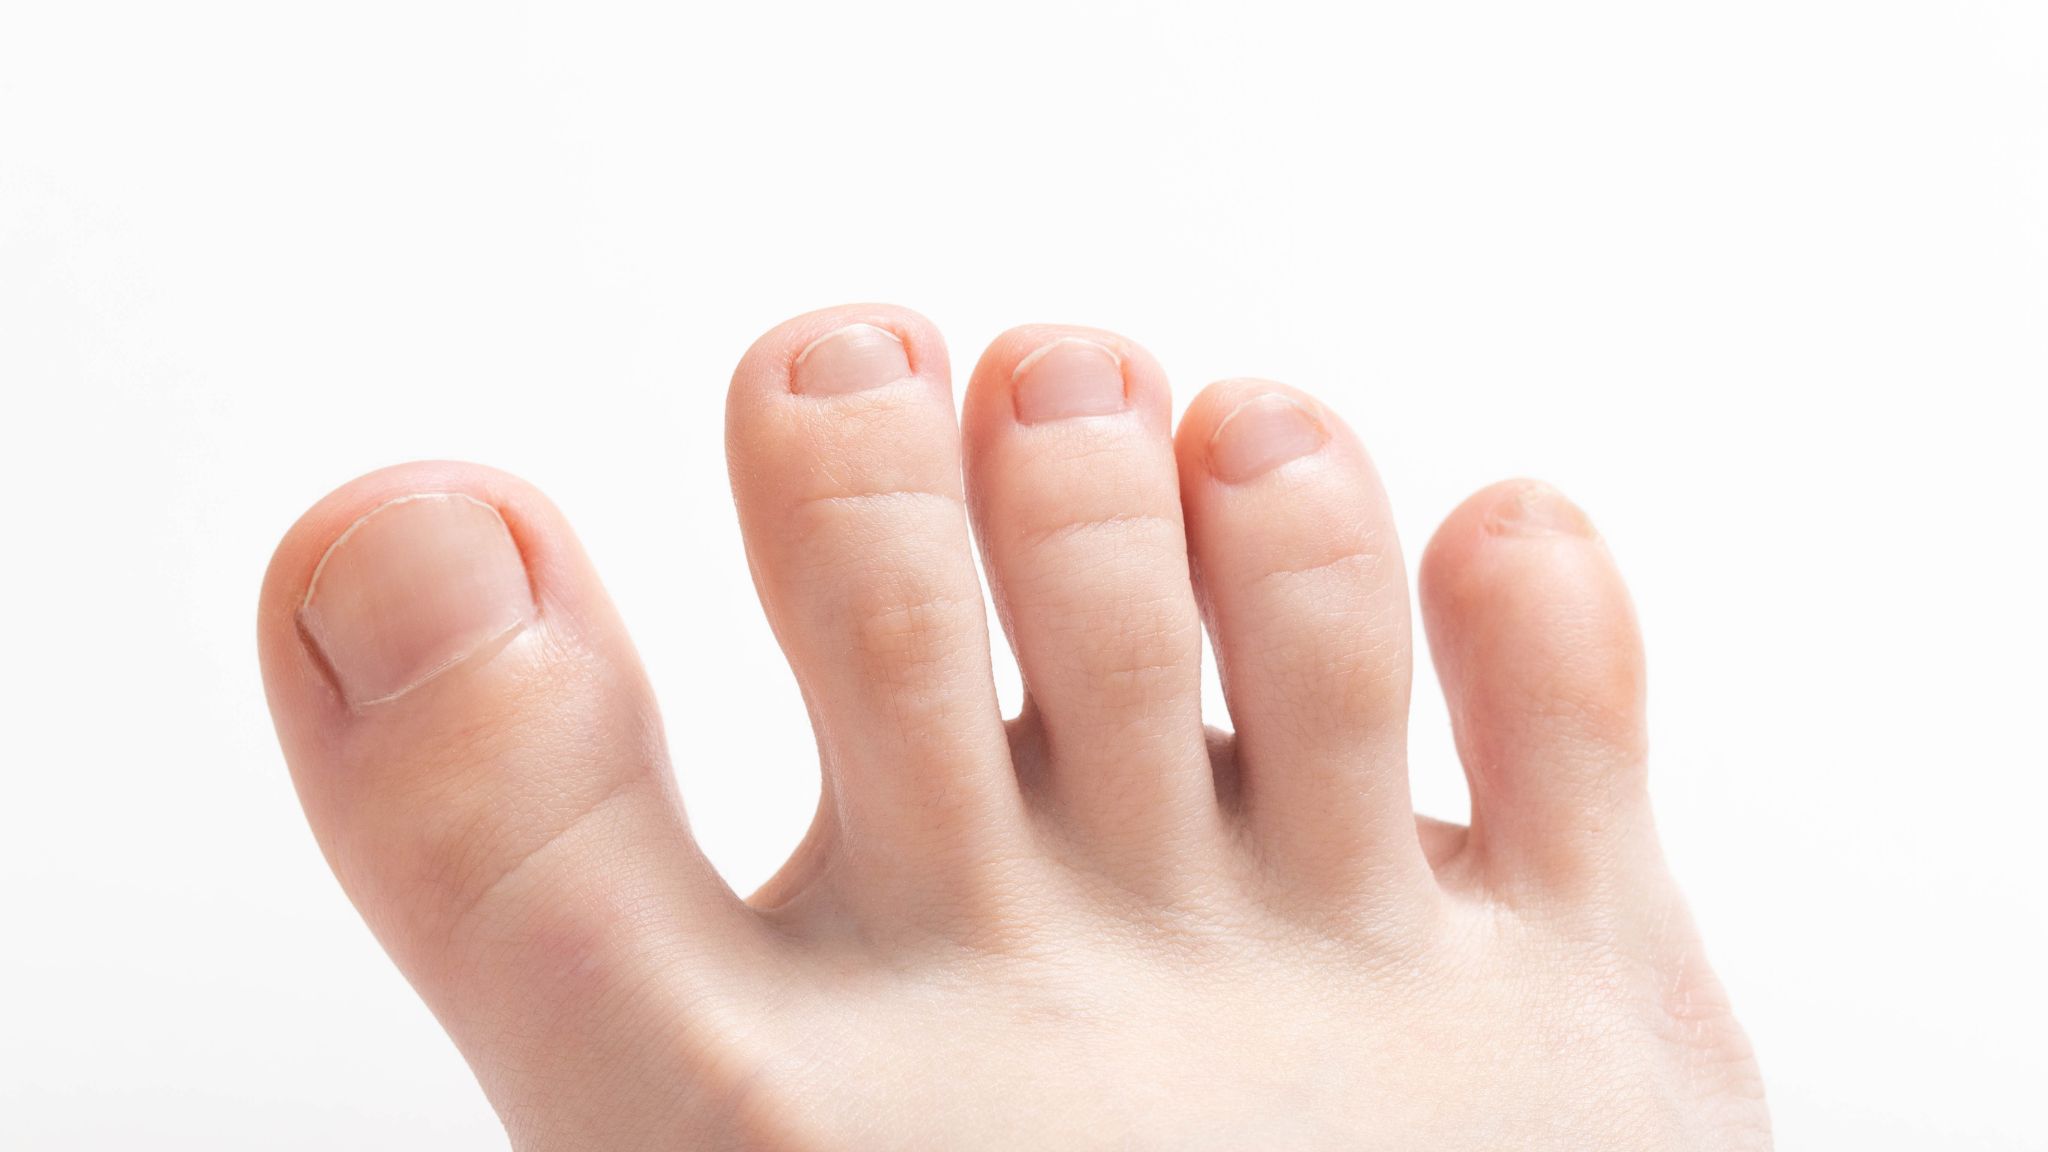 Toes on a white background.